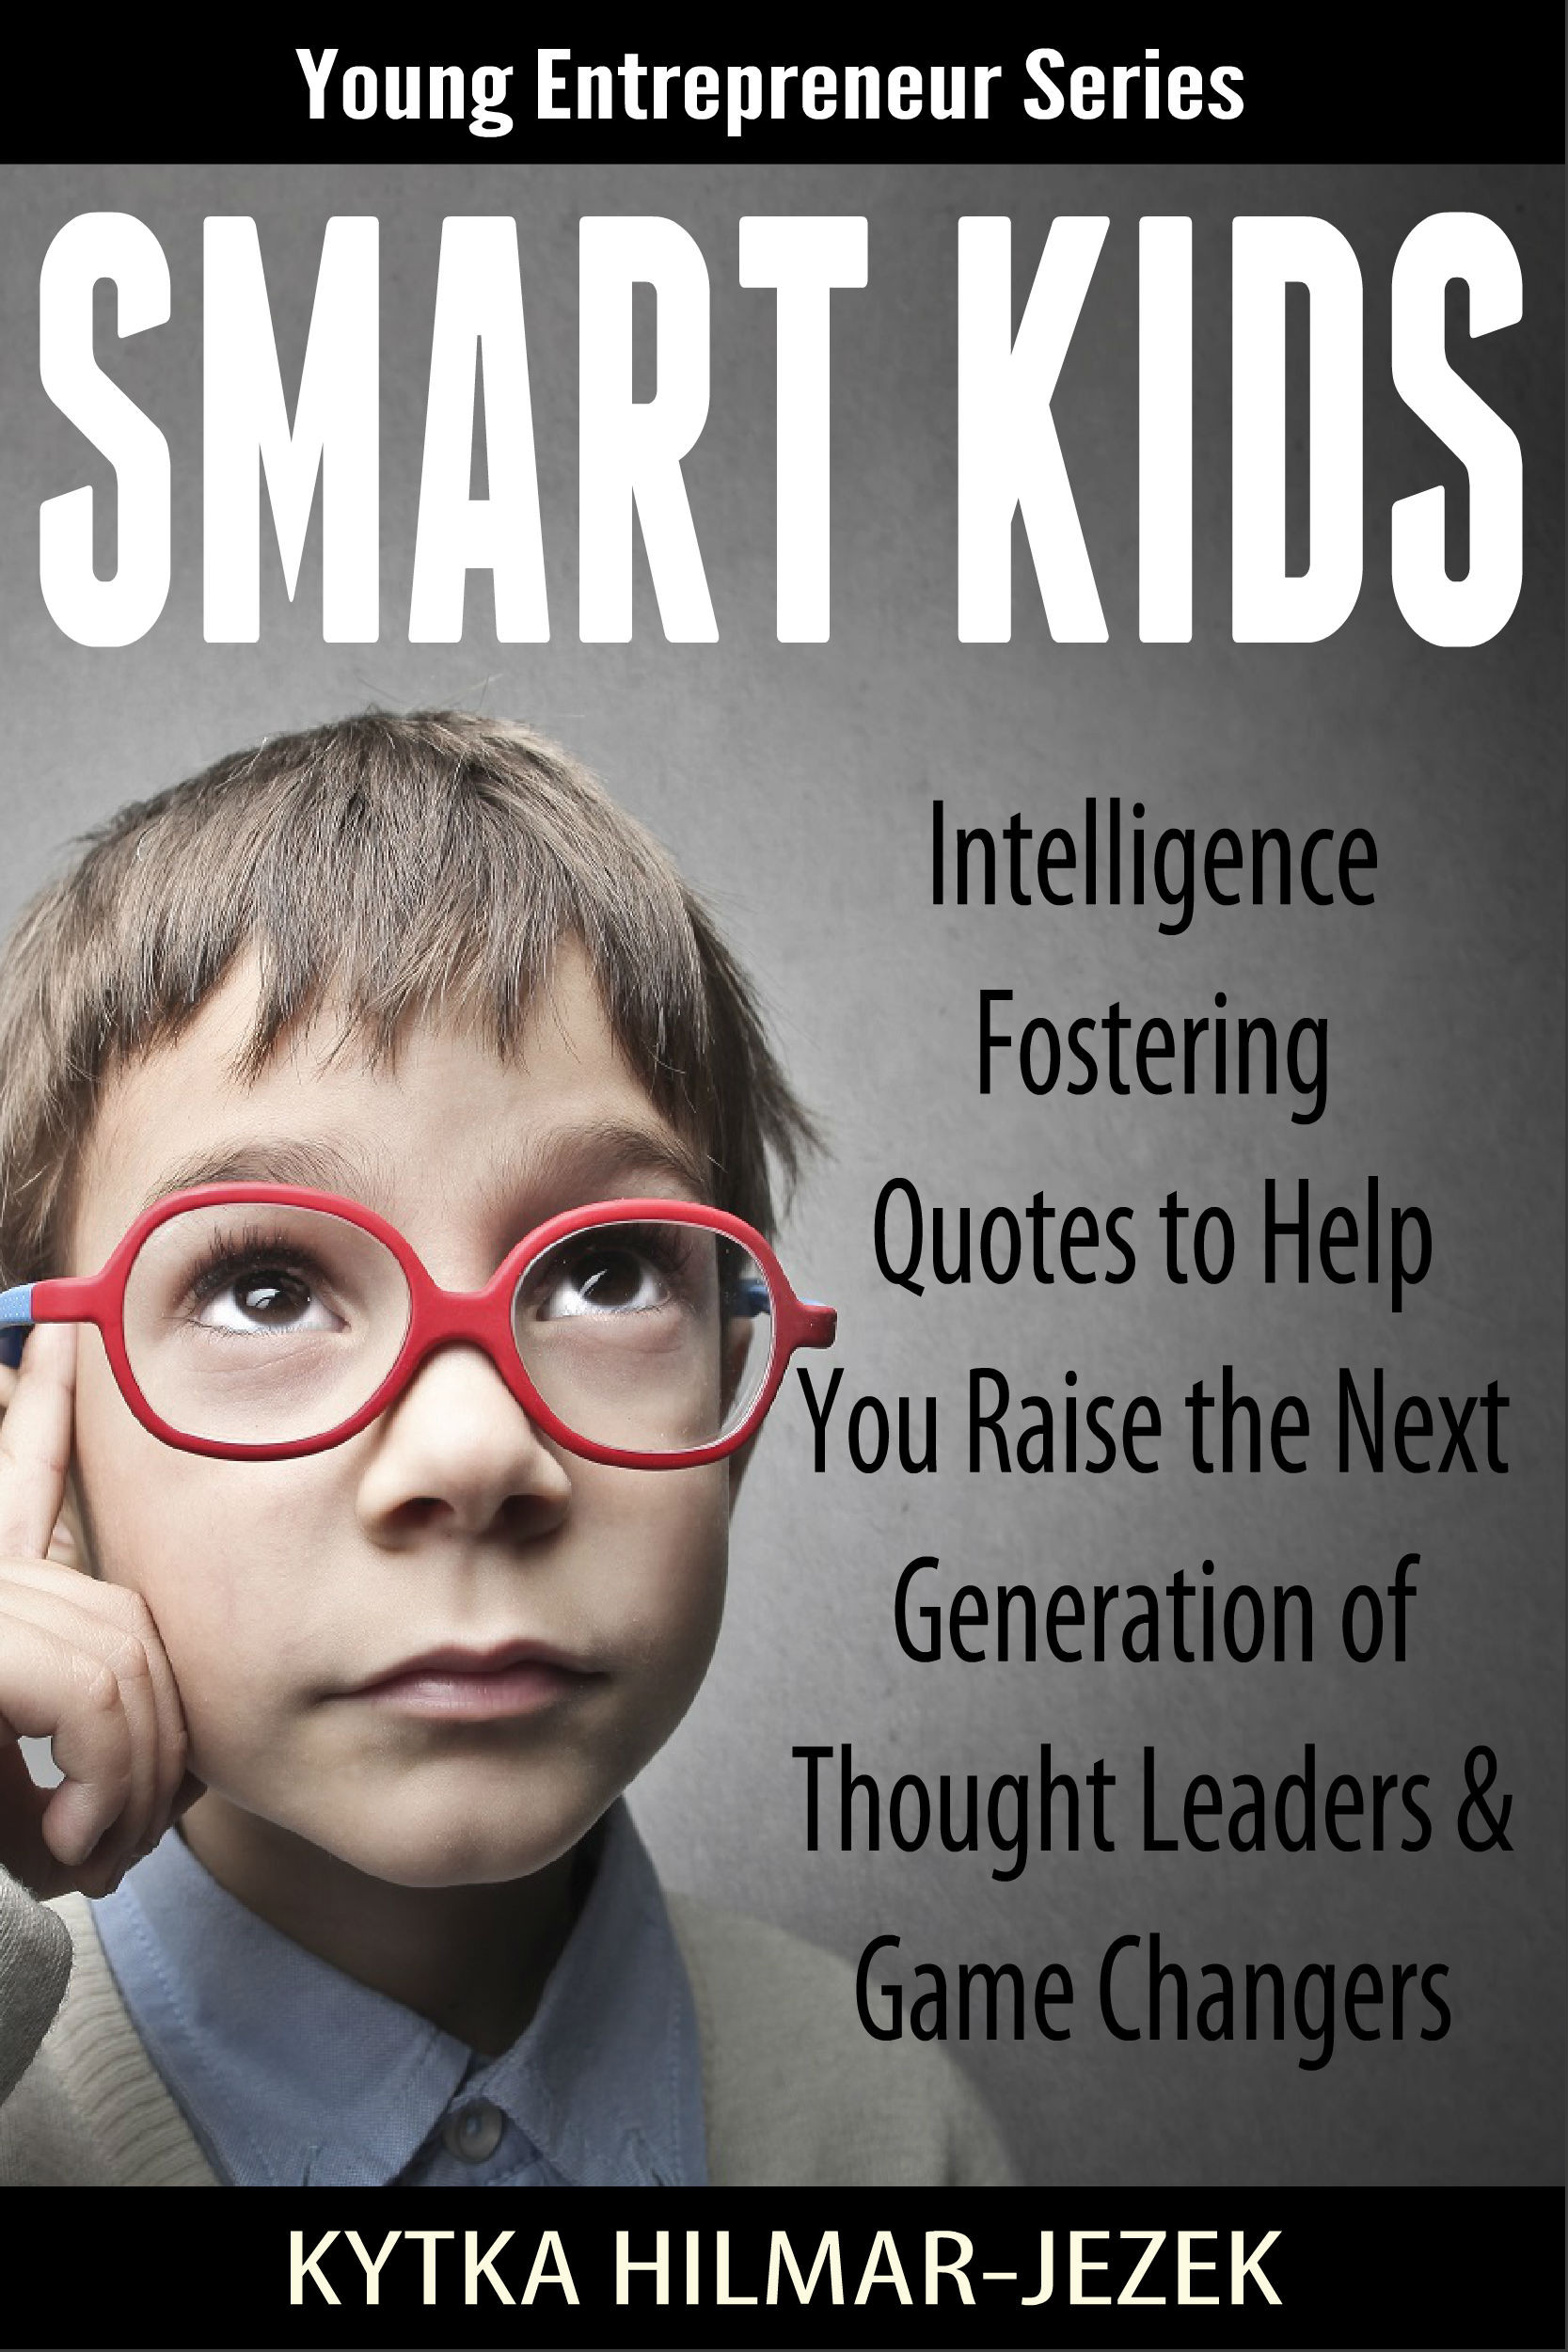 Smart Kids Quotes
 SMART KIDS Intelligence Fostering Quotes to Help You